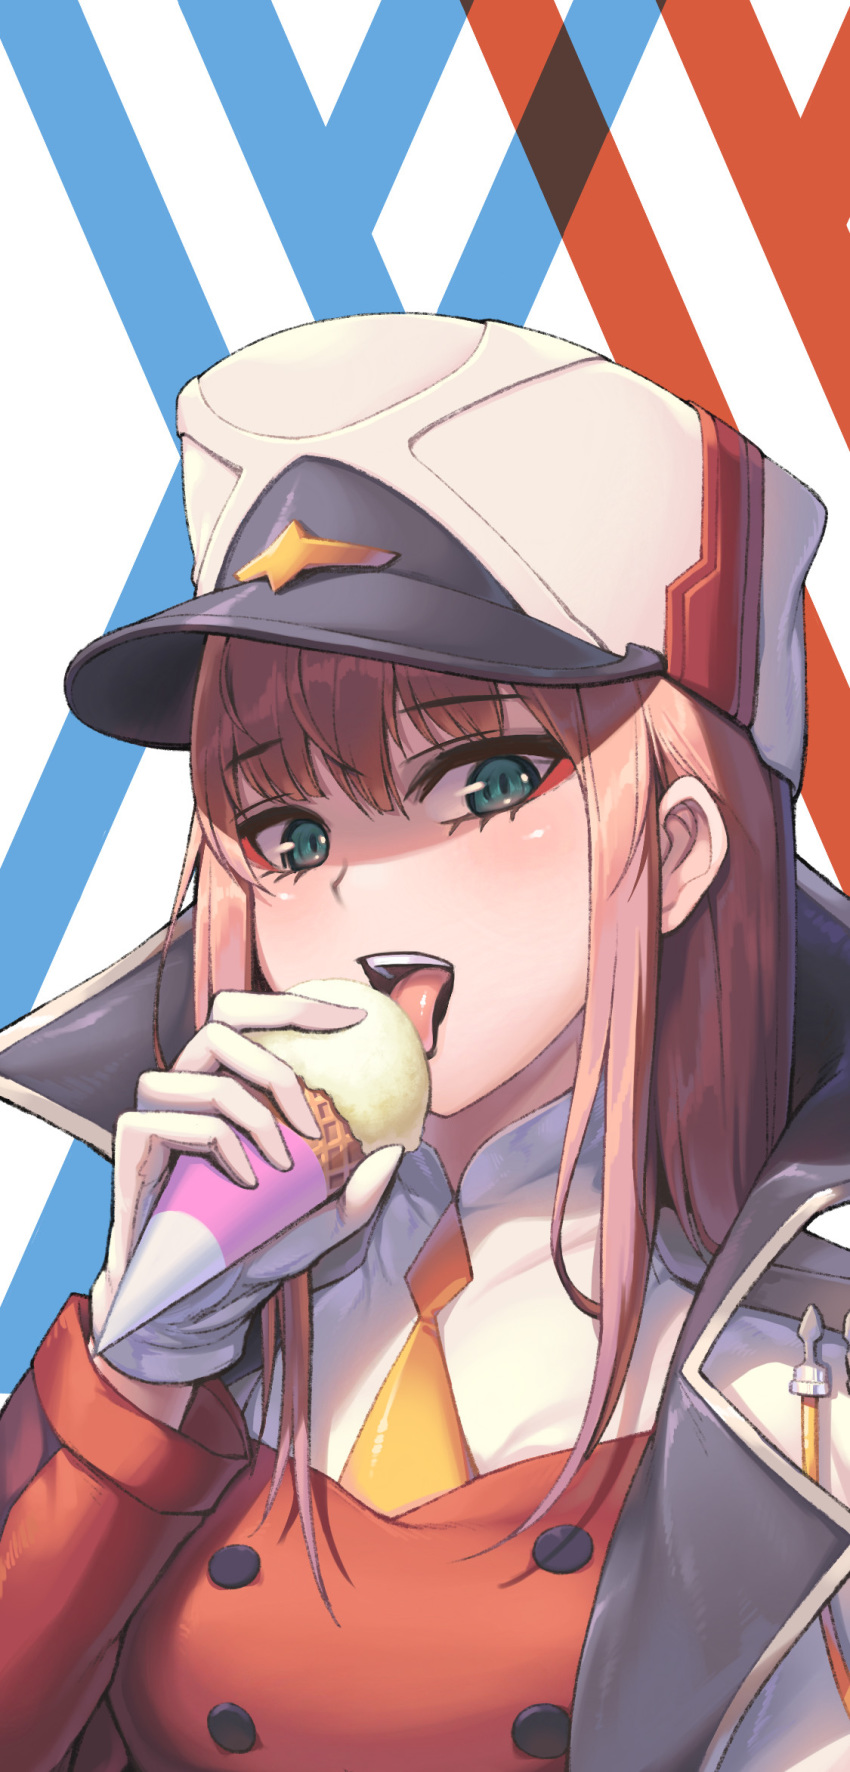 1girl aqua_eyes bangs bara_art commentary darling_in_the_franxx eating eyebrows_visible_through_hair eyeshadow food gloves green_eyes hat highres ice_cream ice_cream_cone jacket jacket_on_shoulders licking looking_at_viewer makeup military military_hat military_uniform orange_neckwear pink_hair straight_hair uniform white_gloves white_jacket zero_two_(darling_in_the_franxx)